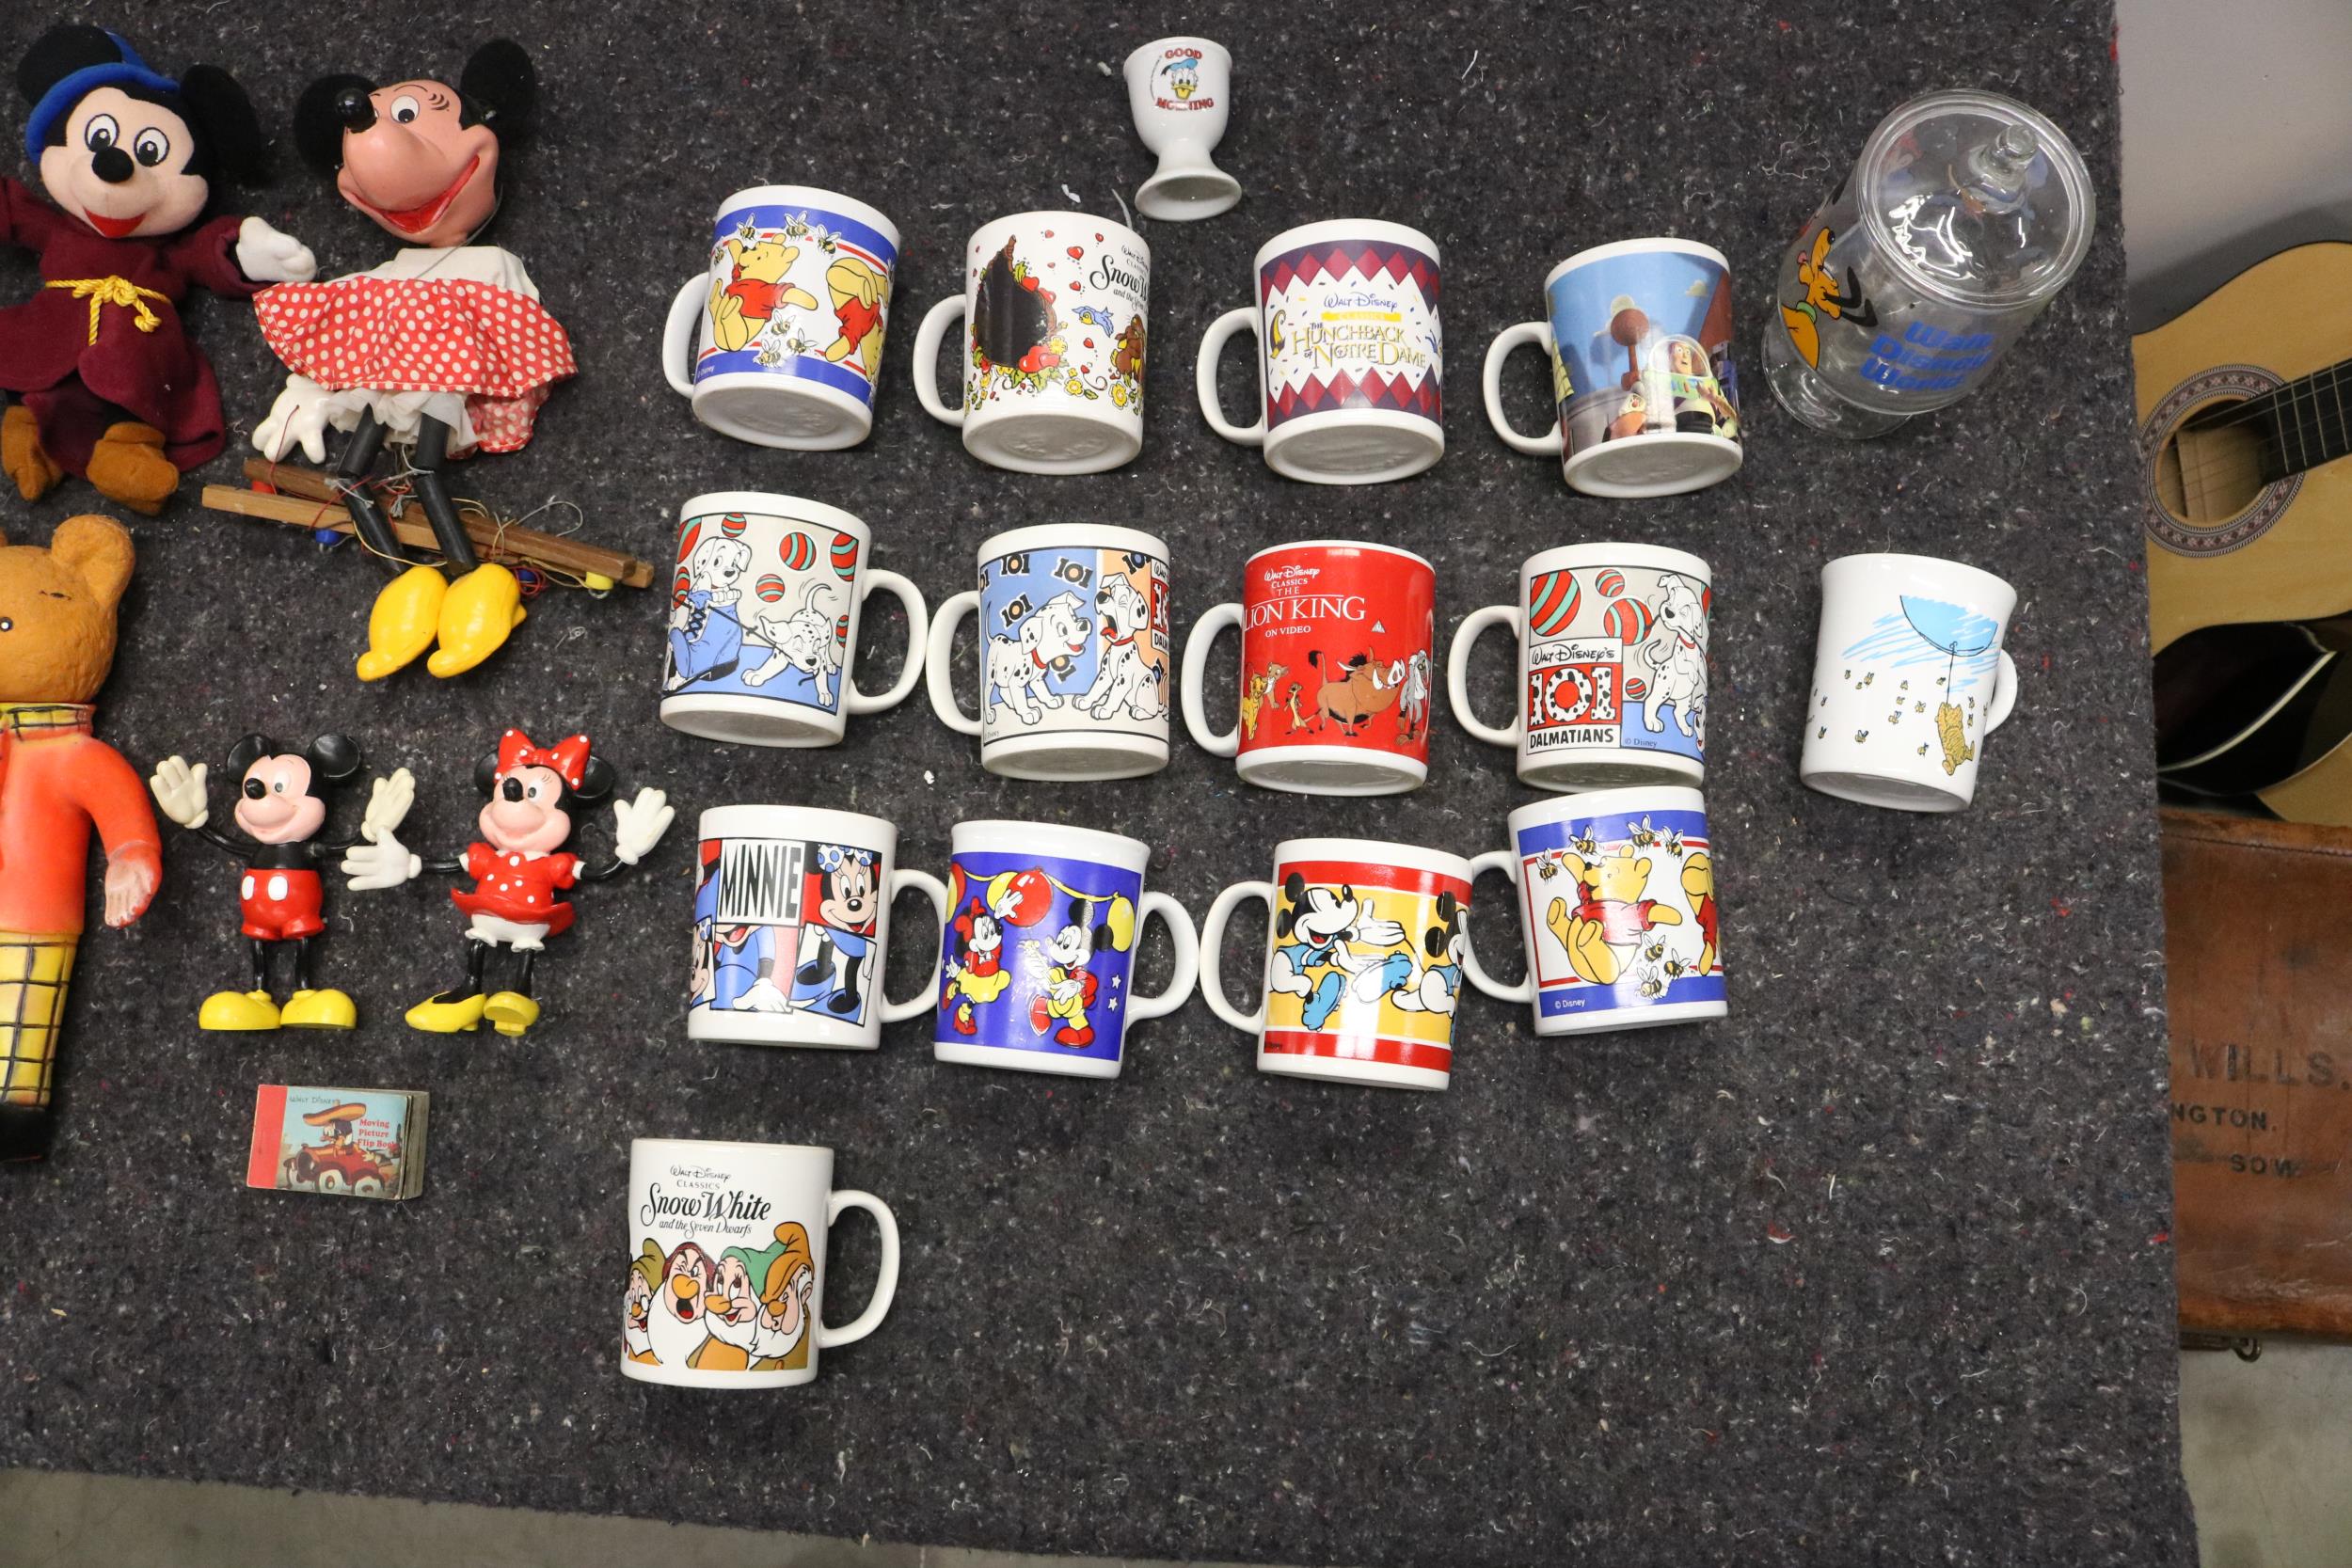 Large Collection Of Items Relating To Disney, Including 8 Vintage Alarm Clocks - Image 4 of 5